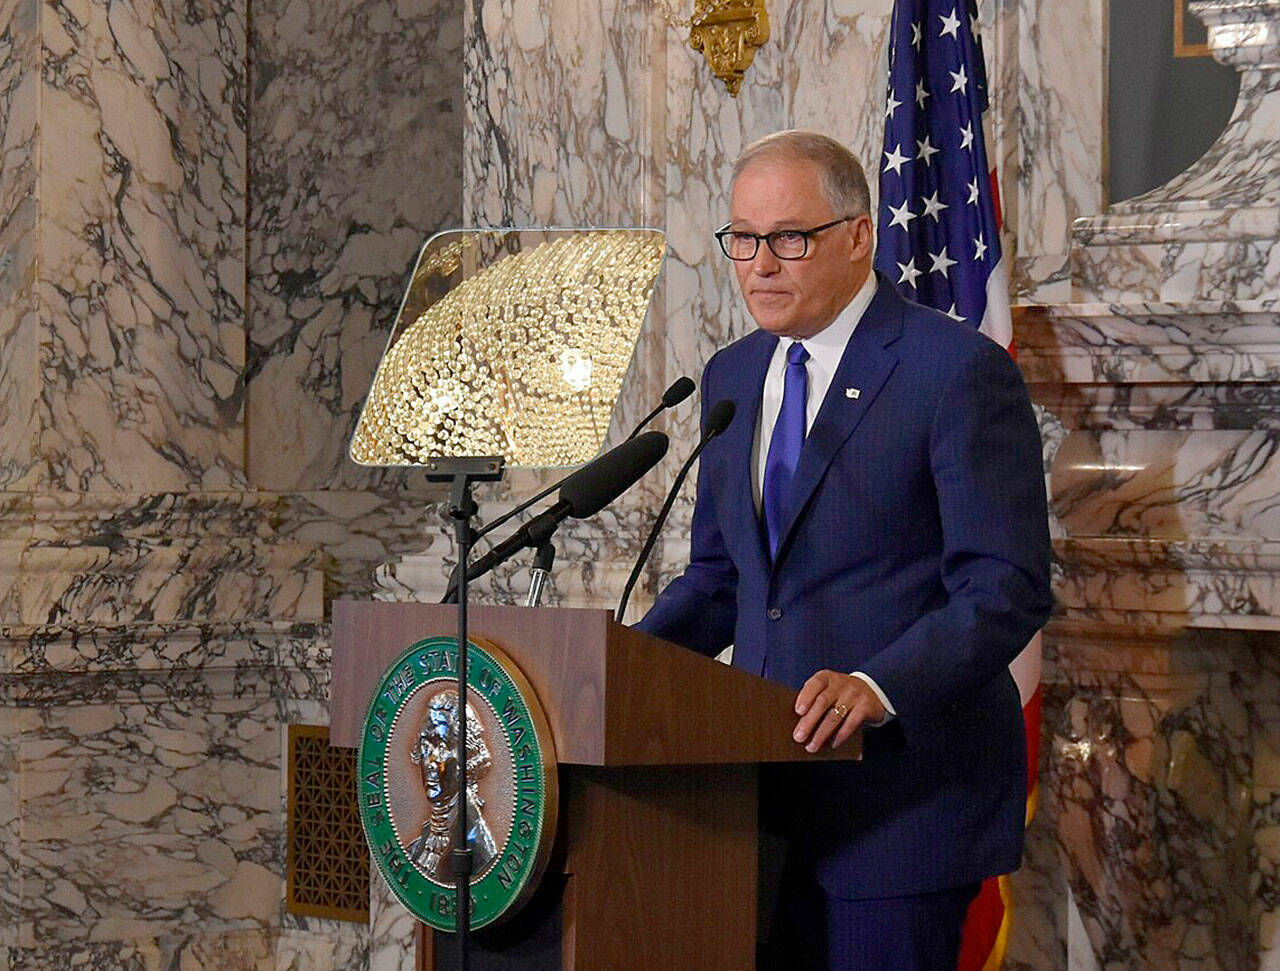 Gov. Jay Inslee delivers his annual State of the State address in the state Capitol on Jan. 11. Governor’s office photo